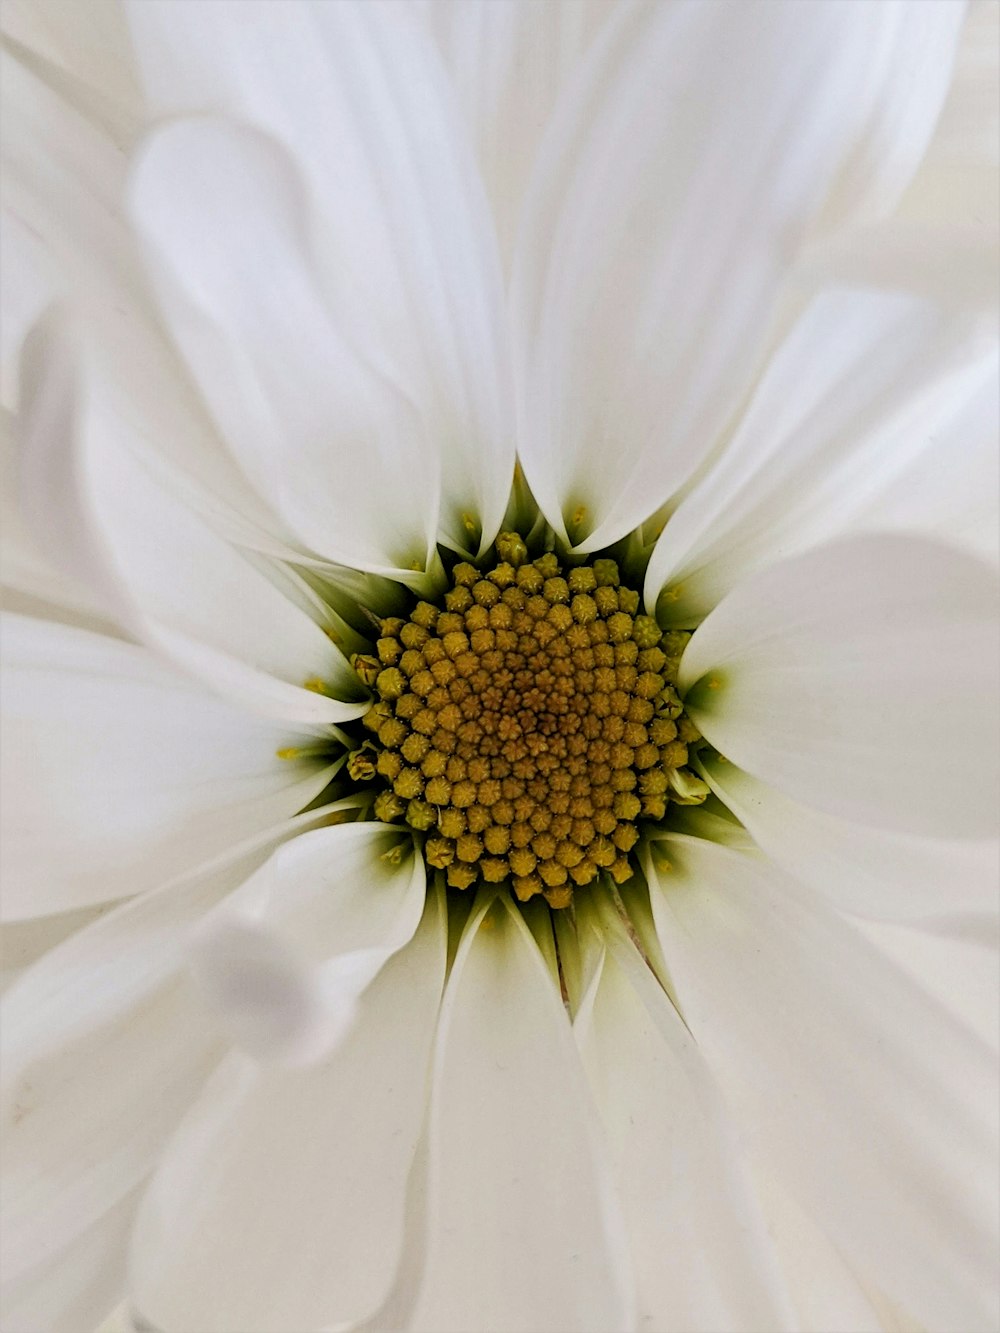 white daisy in bloom close up photo